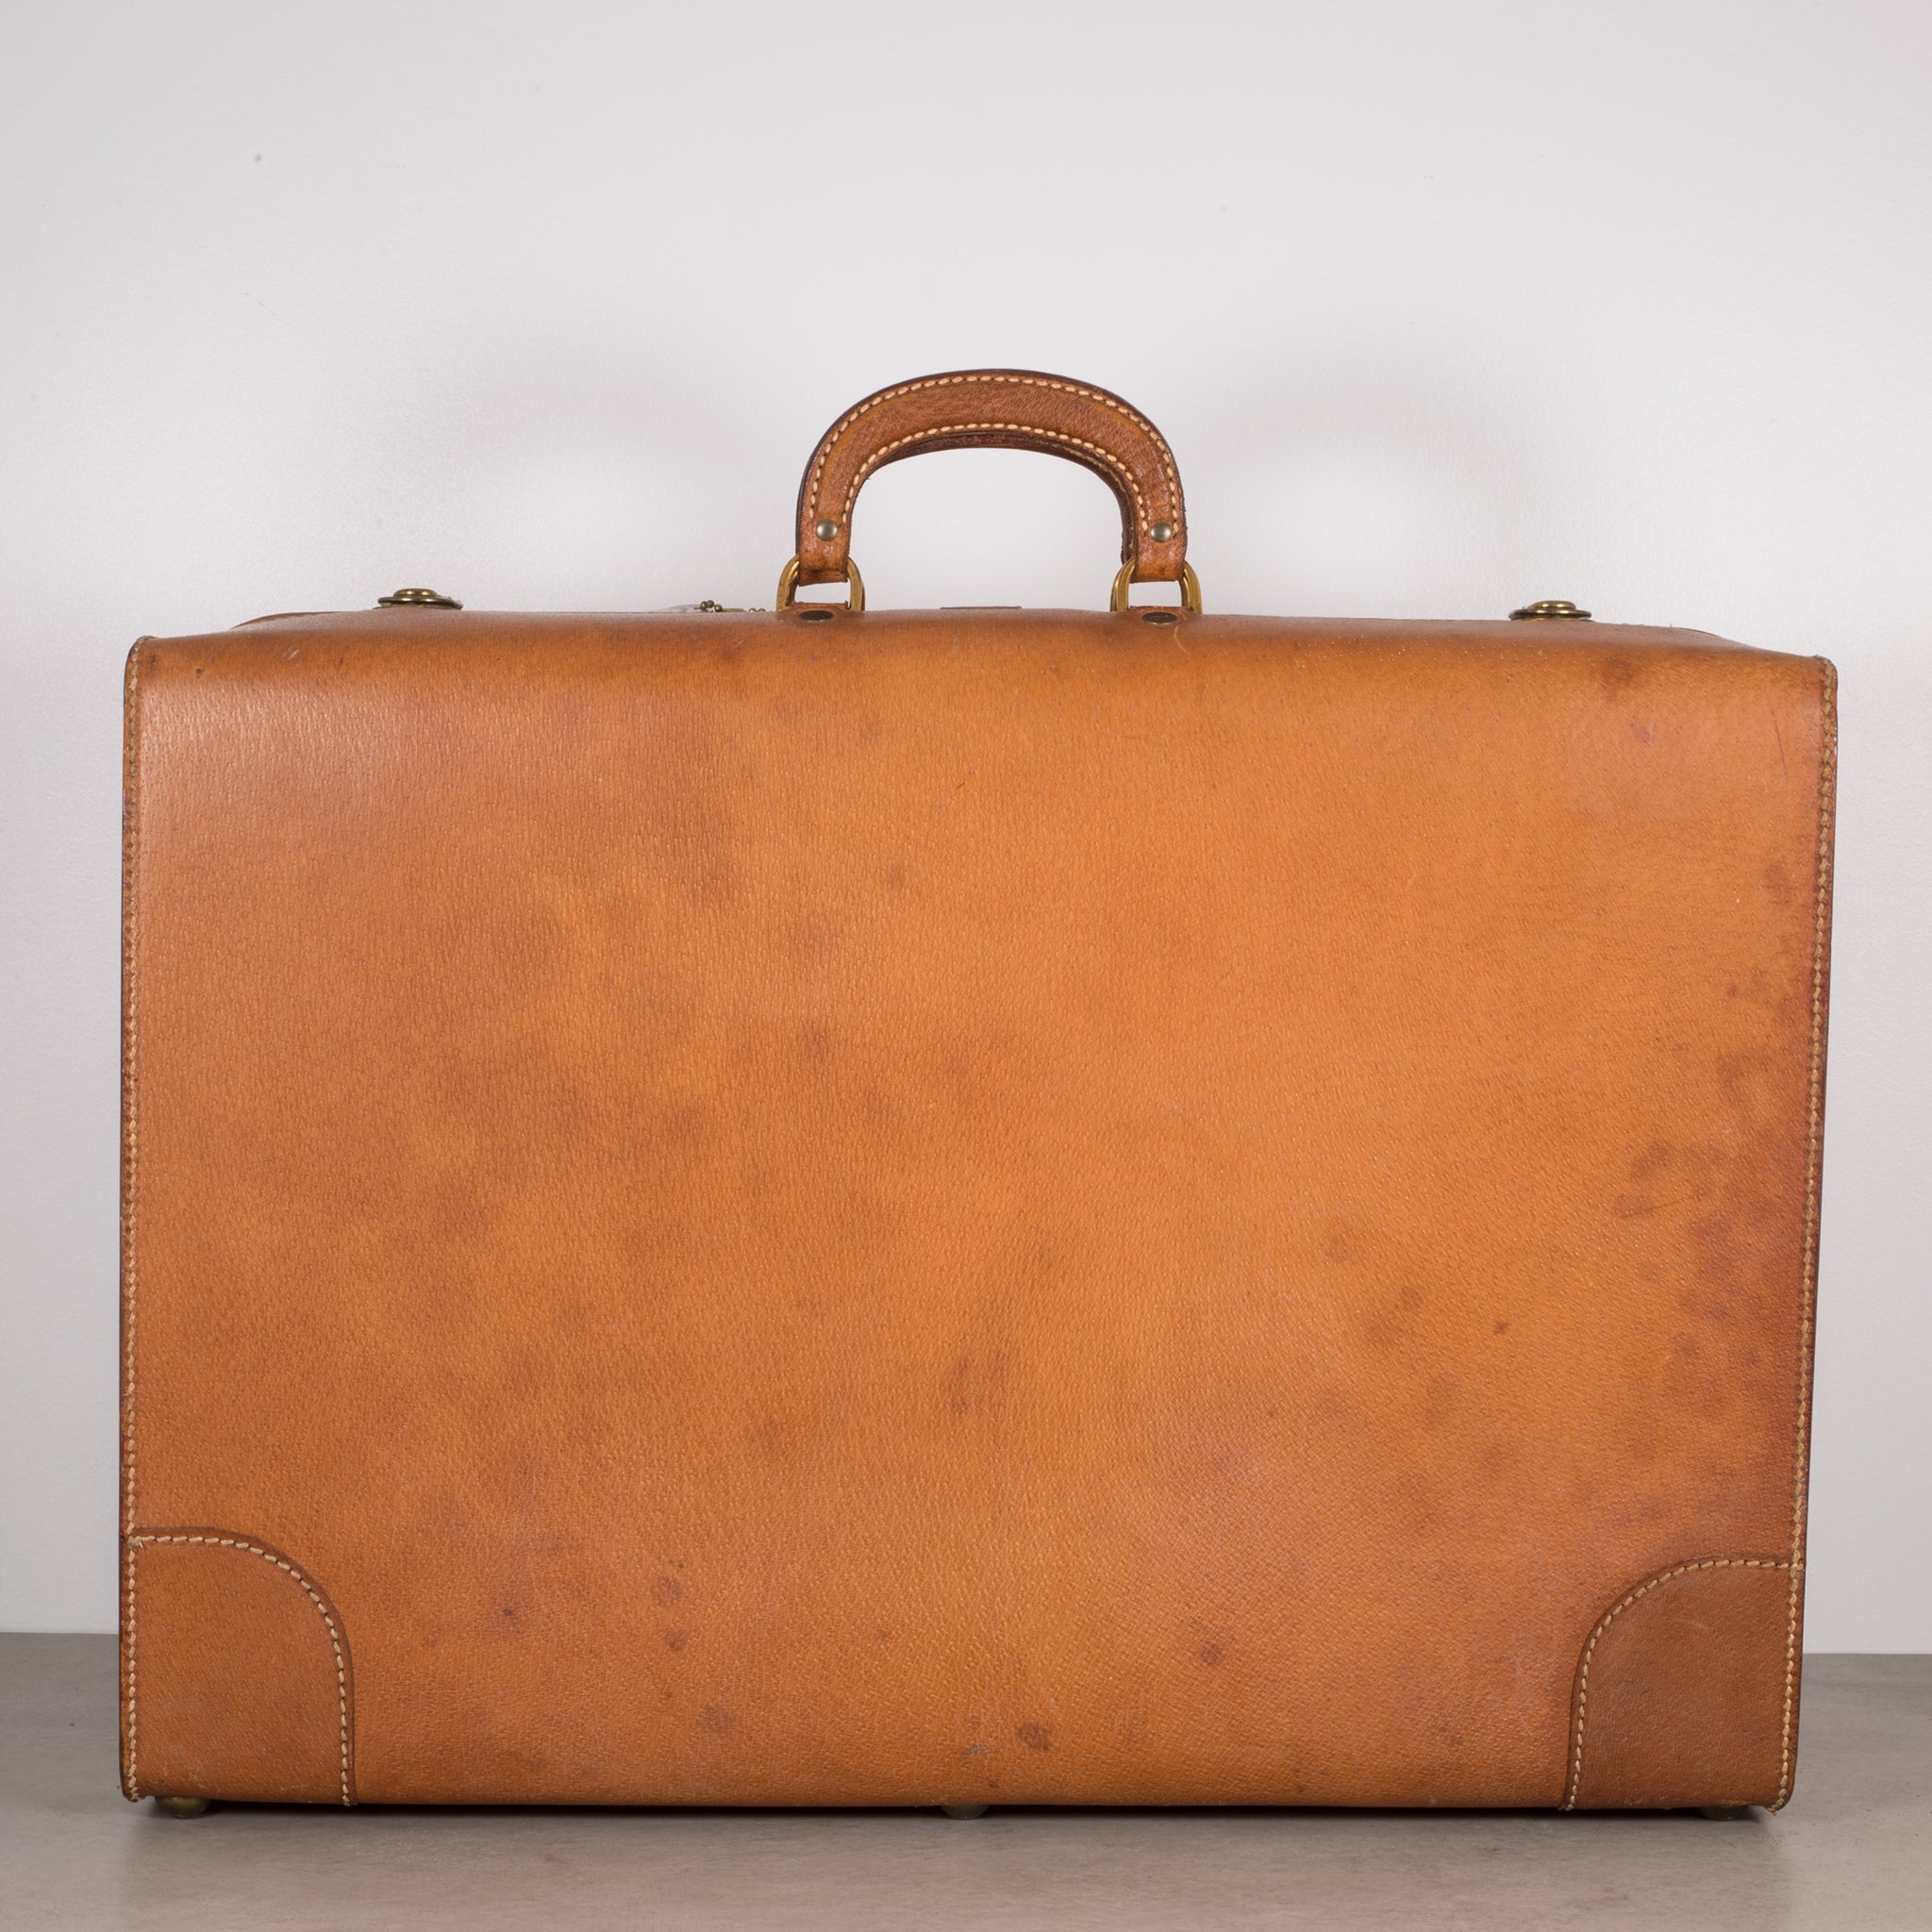 Pigskin Luggage by Boyle c.1940 – S16 Home